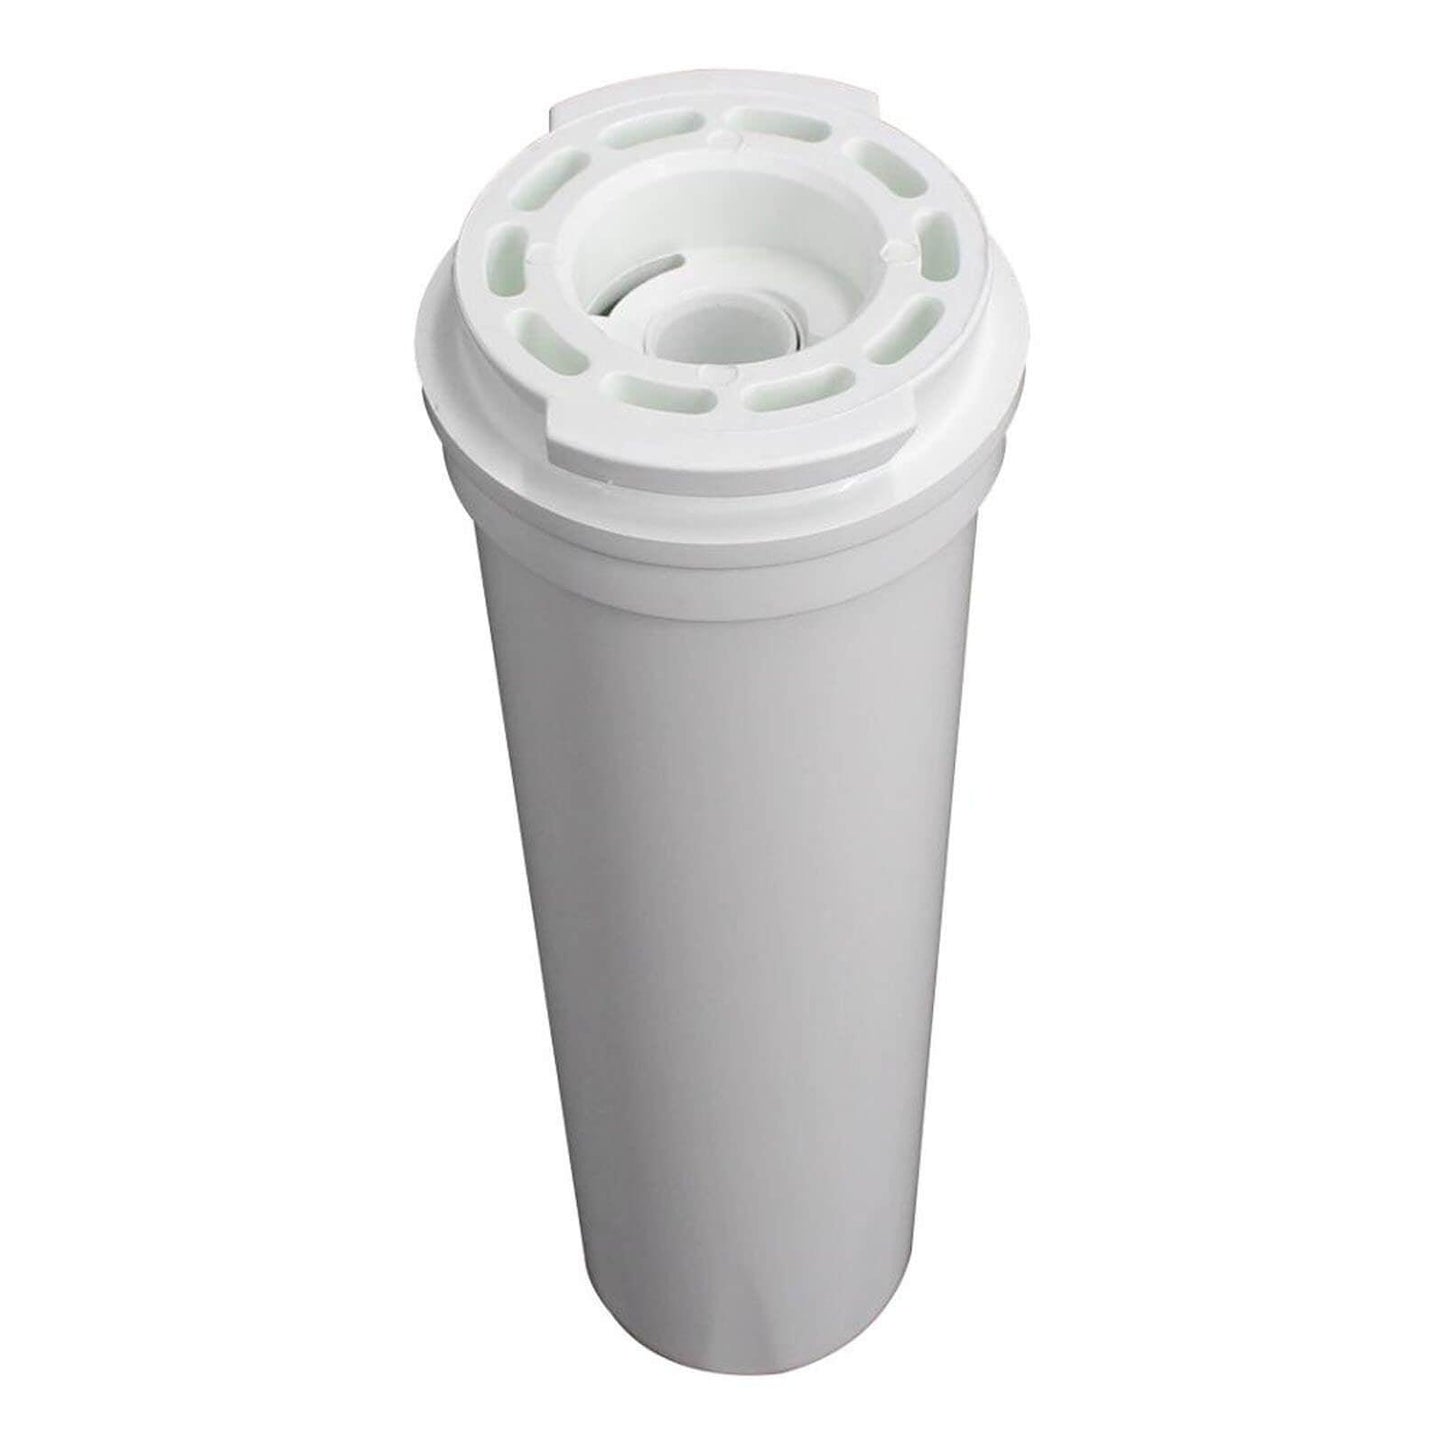 Fridge Filters Compatible For Fisher Paykel 836848 RF610ADUSX4 RF610ADUX E442B Sparesbarn